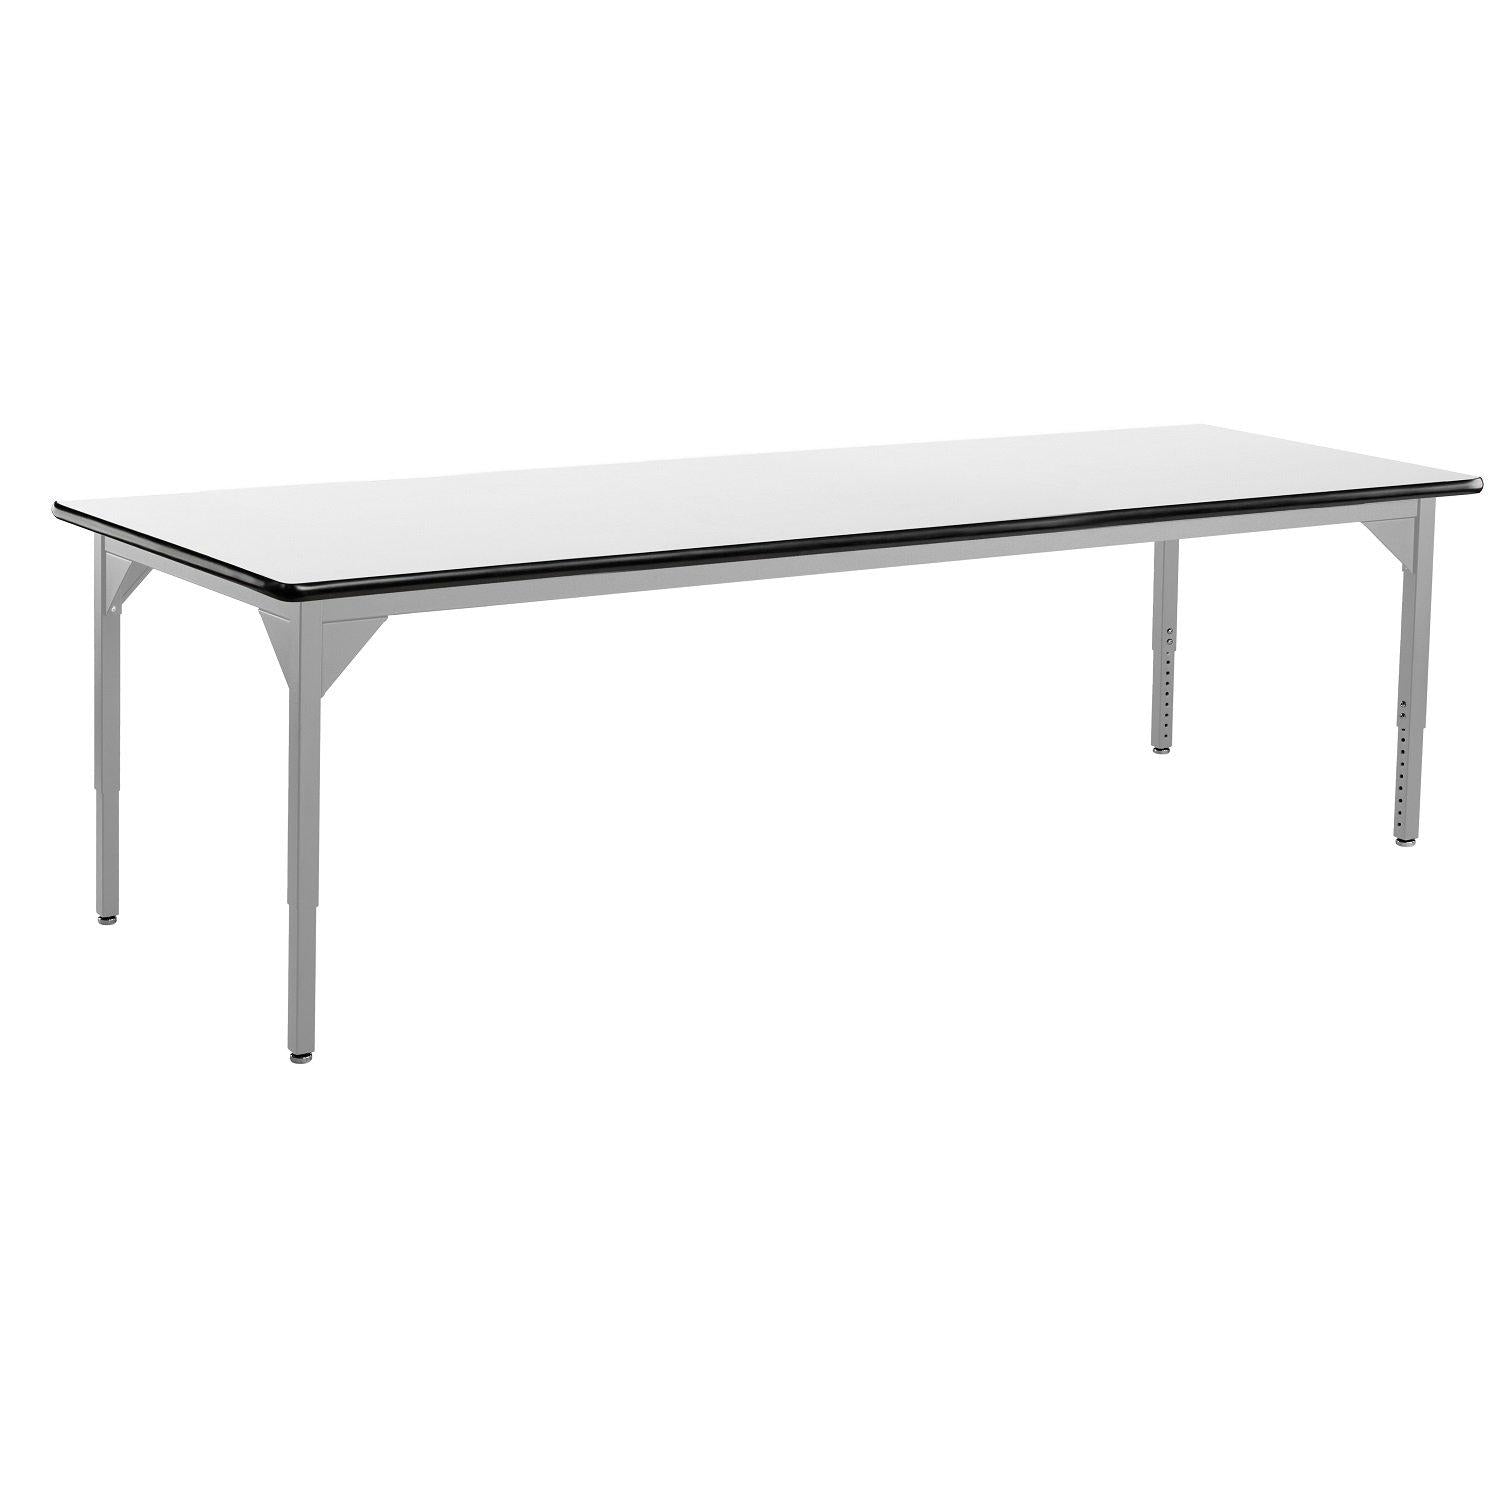 Heavy-Duty Height-Adjustable Utility Table, Soft Grey Frame, 36" x 84", Whiteboard High-Pressure Laminate Top